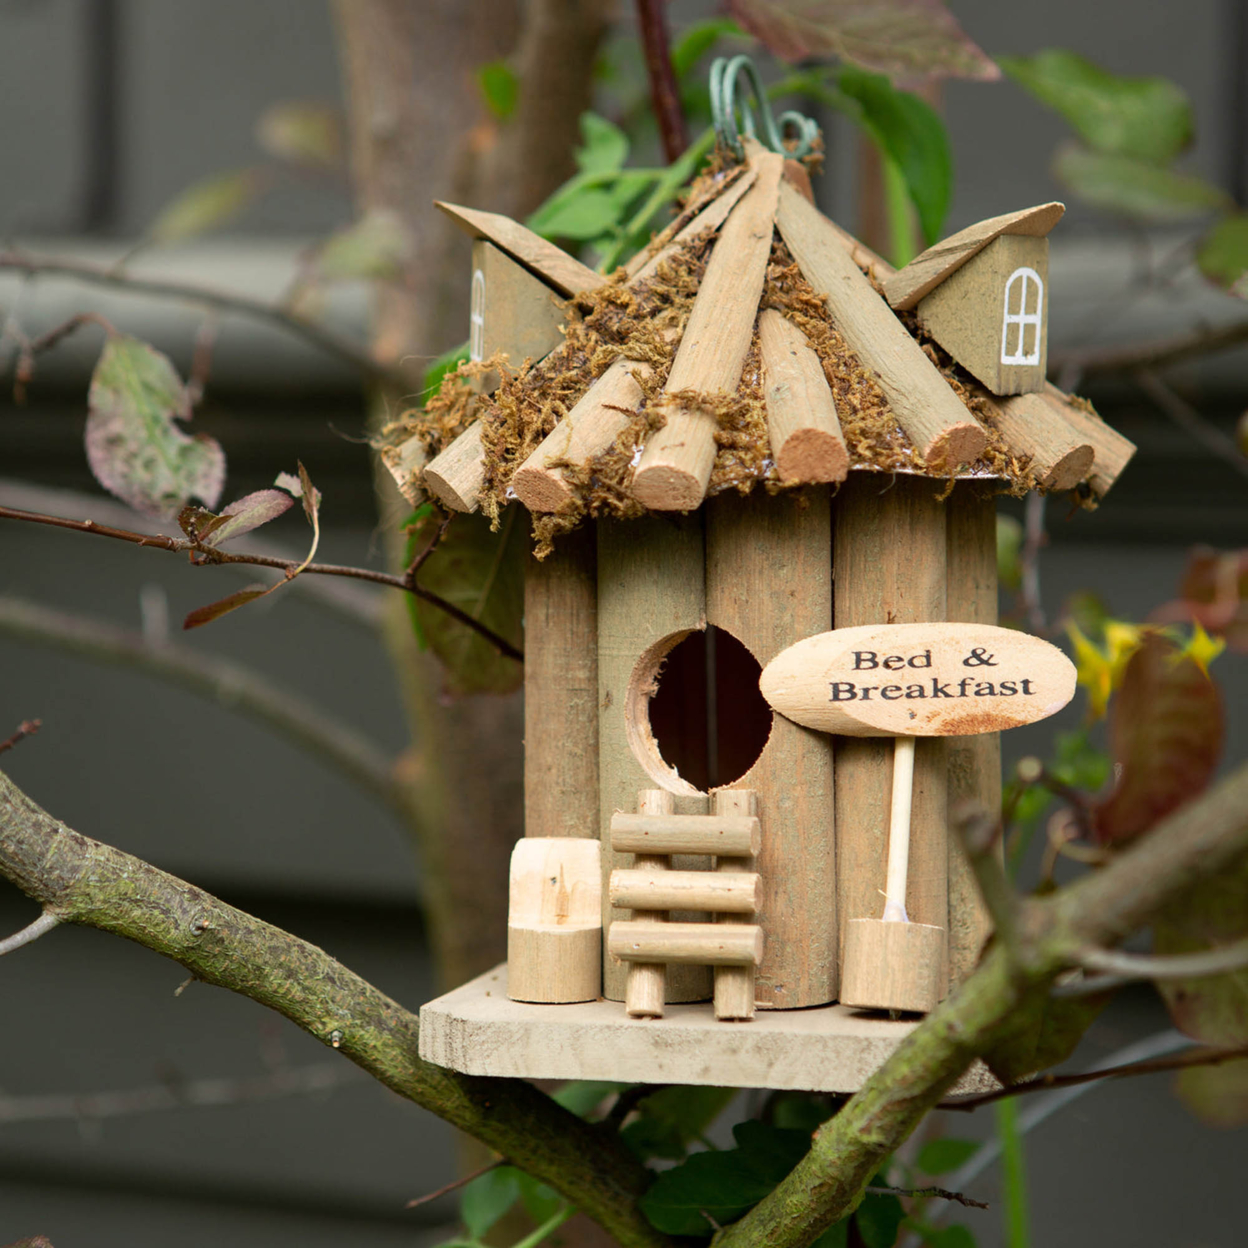 Home Decorative Bed And Breakfast Wood Birdhouse - Brown - image 3 of 5